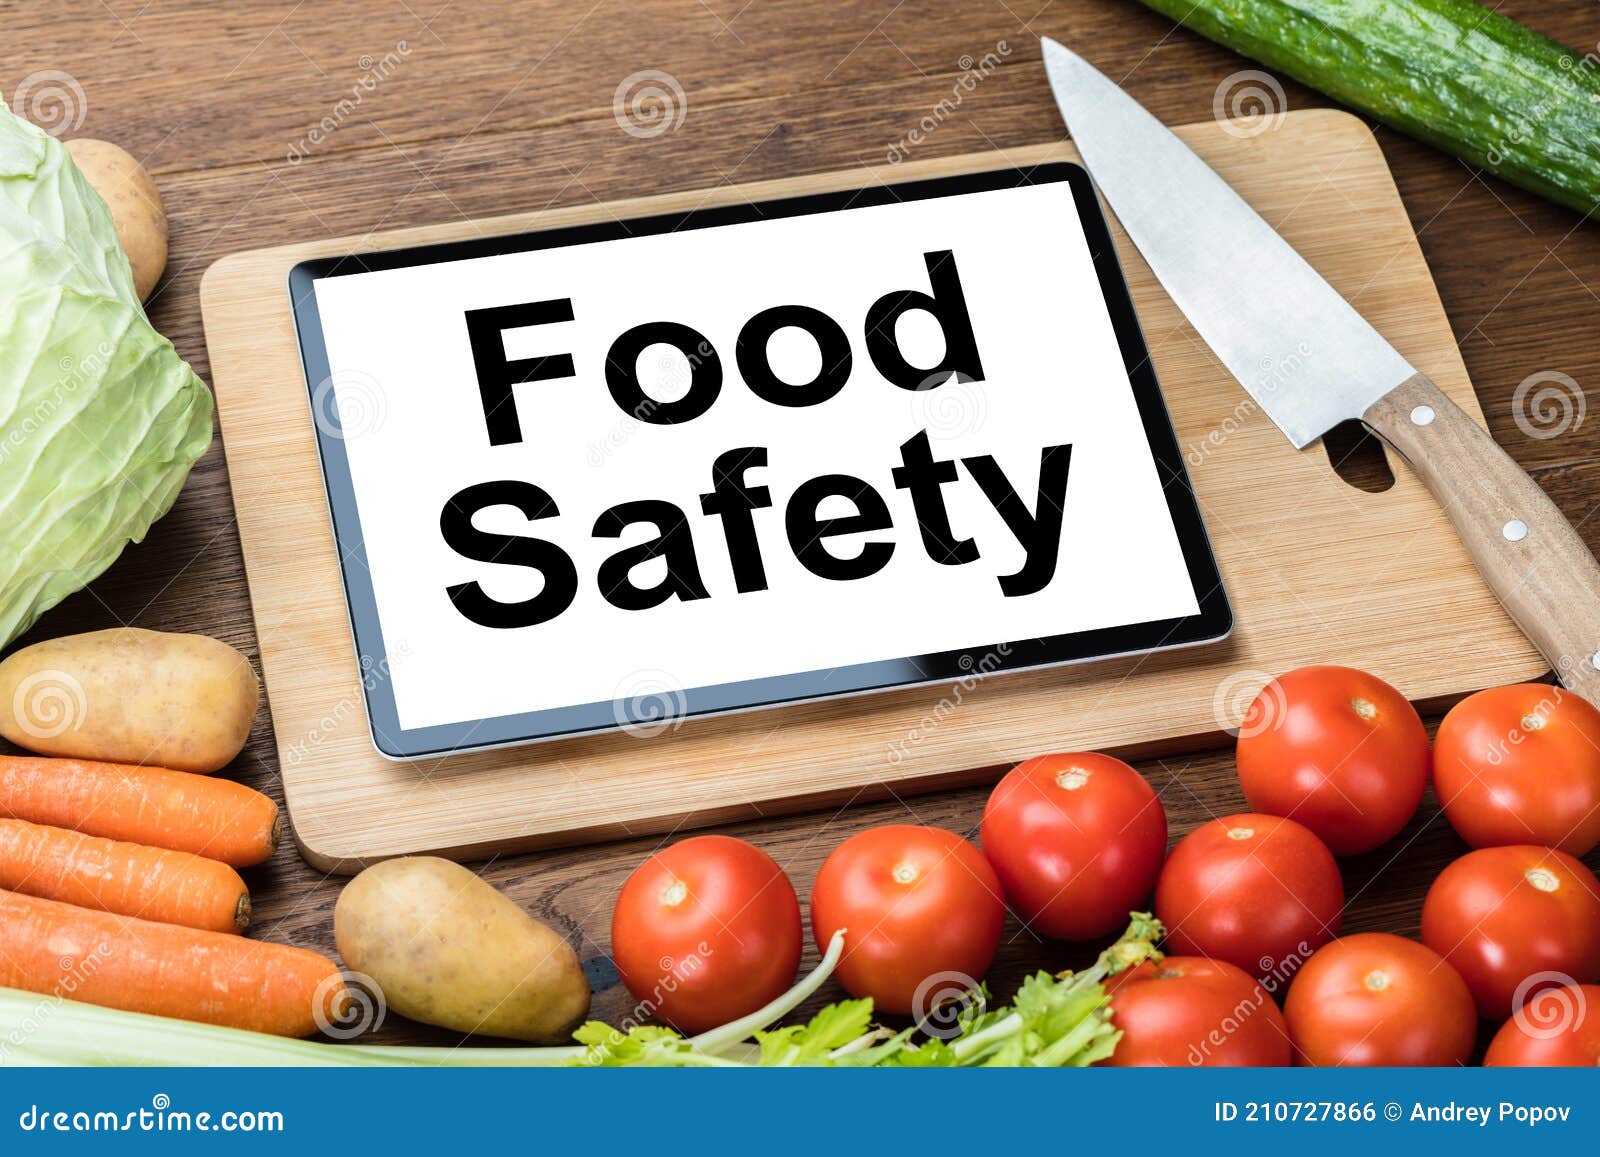 digital tablet with food safety text